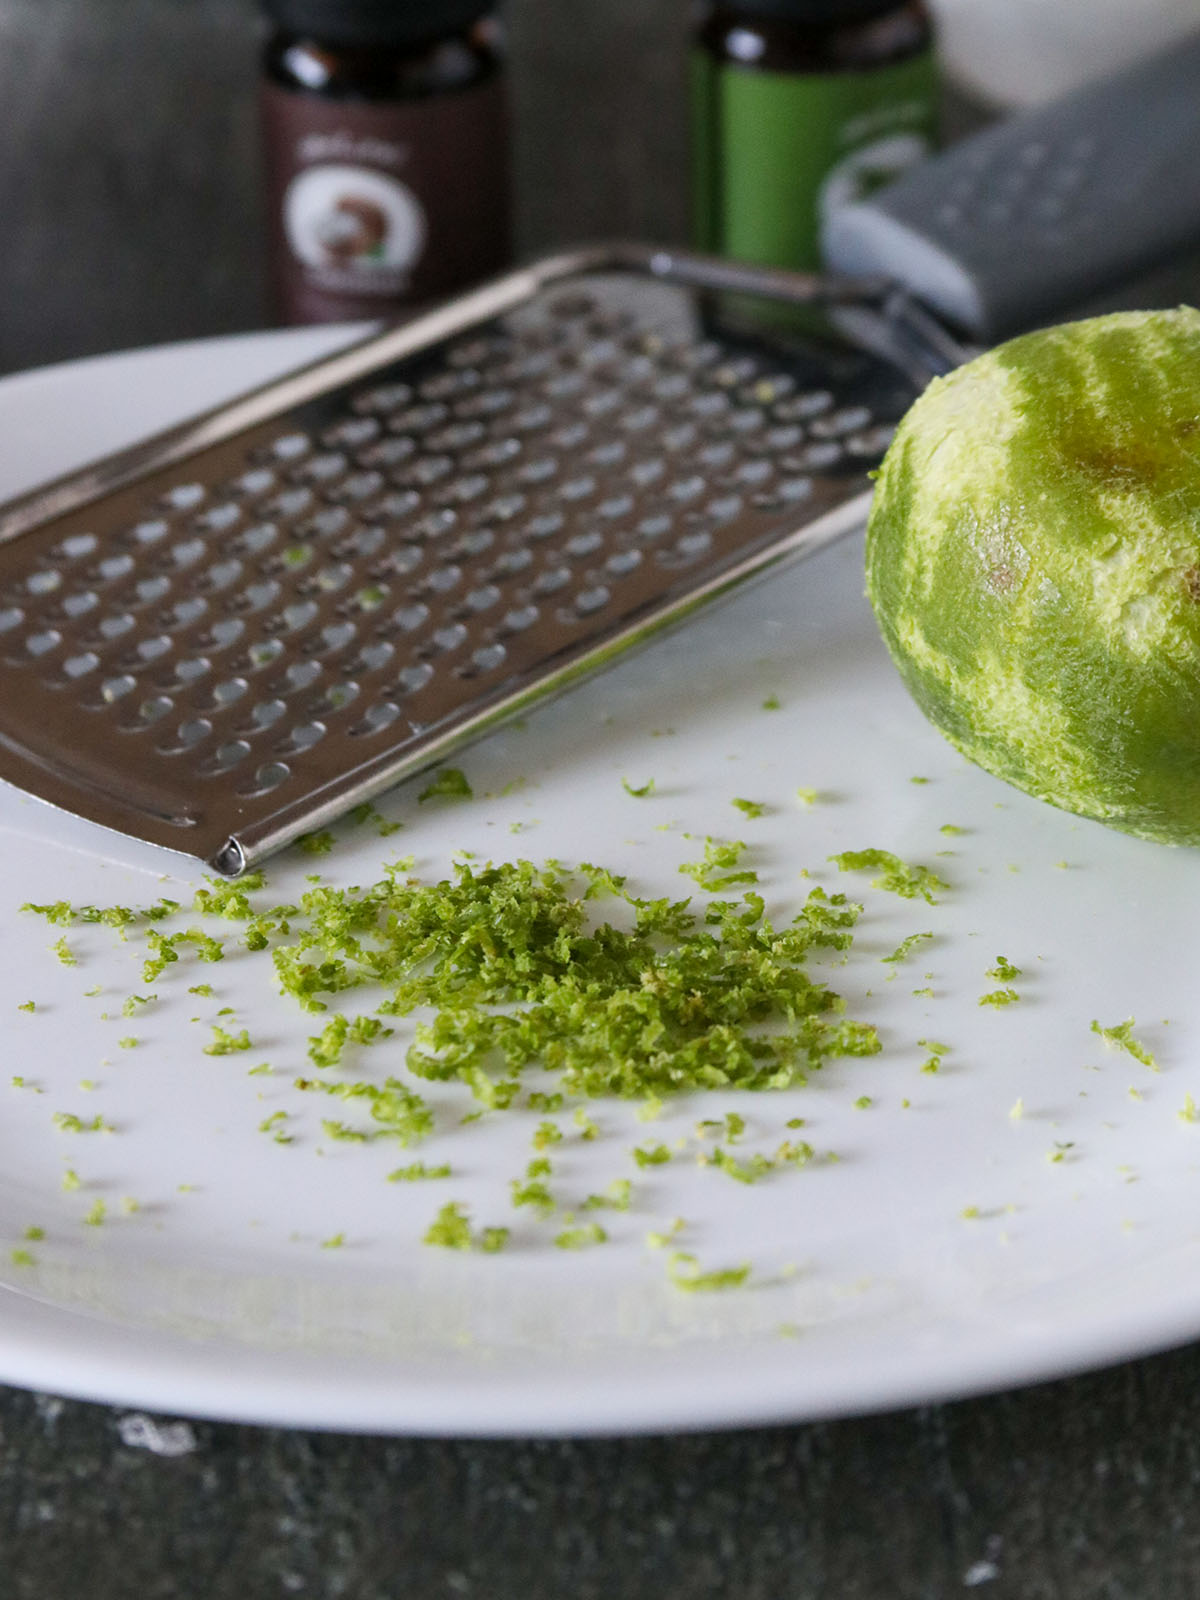 grating lime zest on a plate